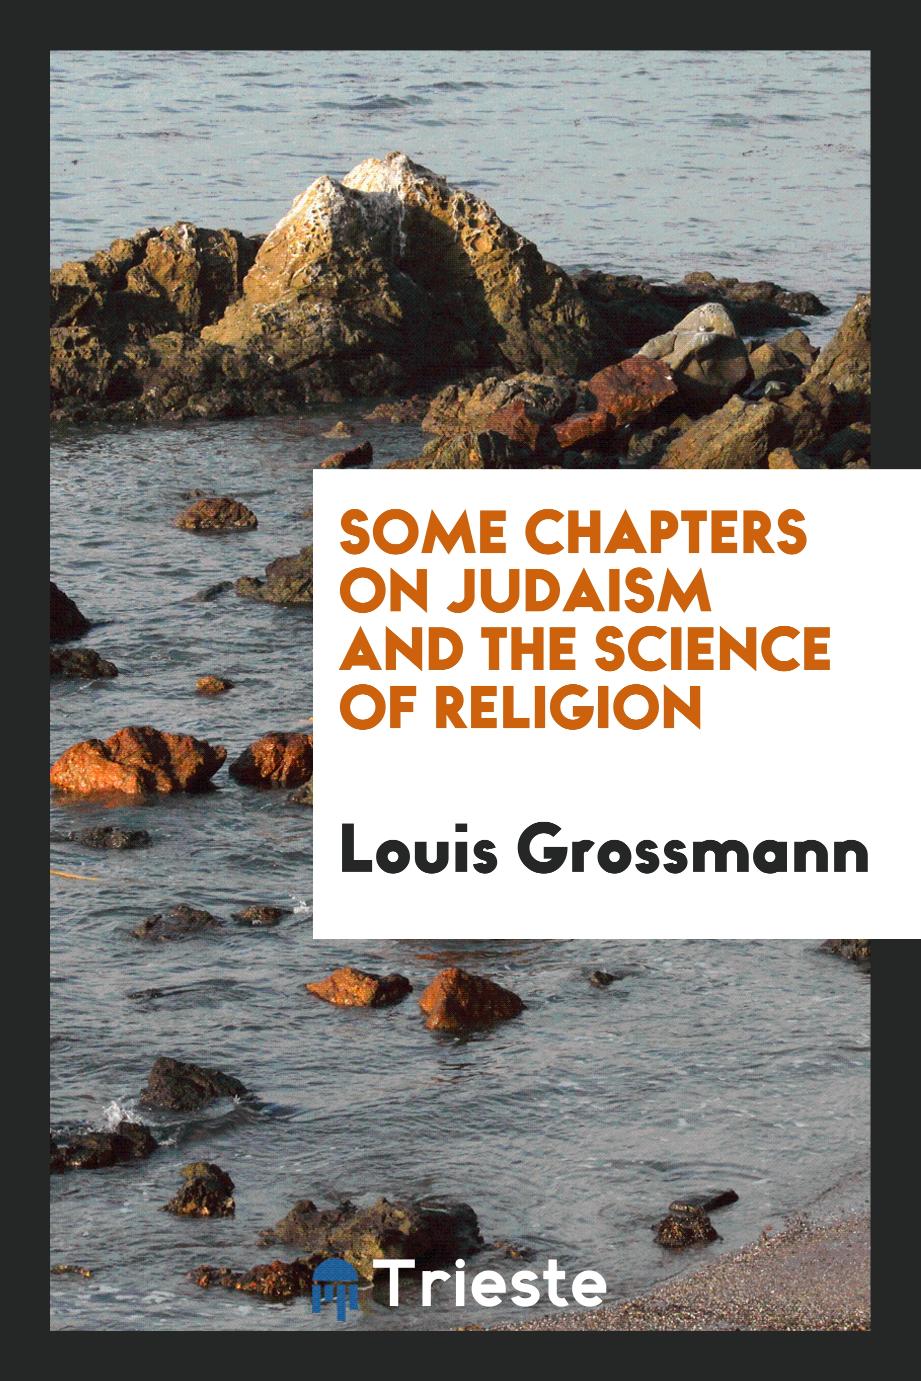 Some chapters on Judaism and the science of religion